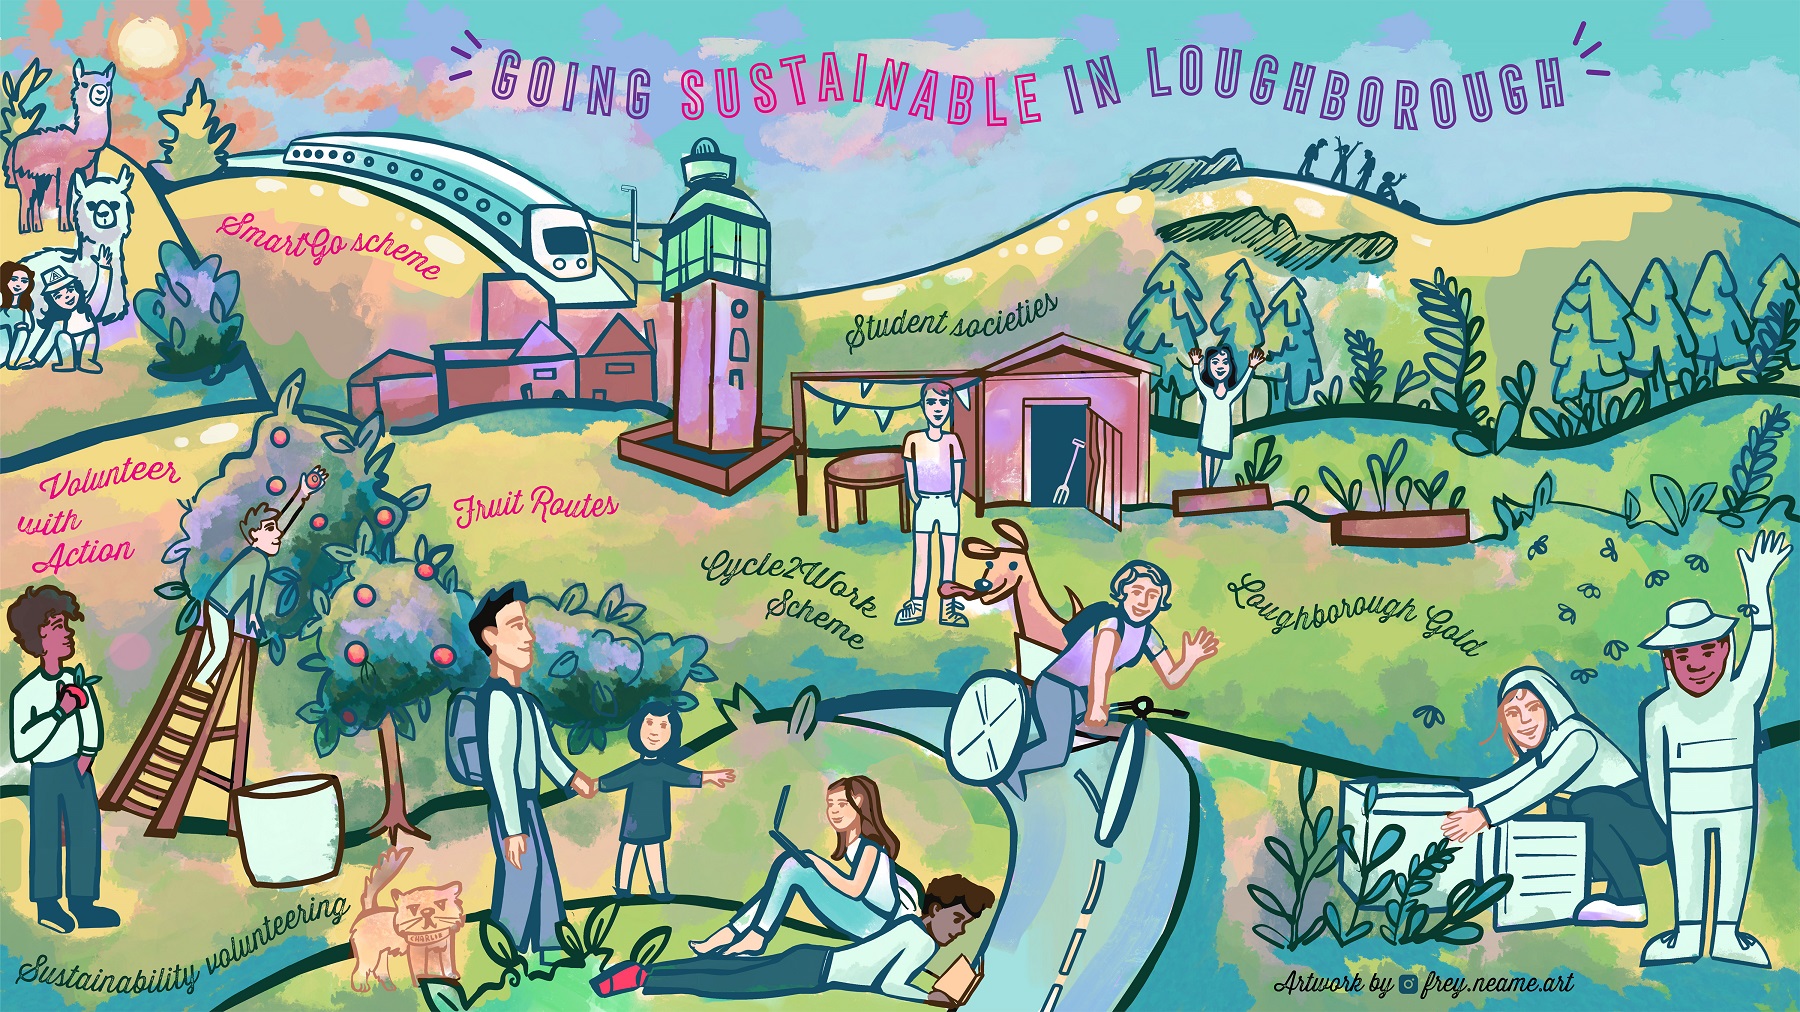 A colourful mural design showing characters on a representation of campus partaking in varied sustainable practices with buildings and landmarks of loughborough scattered around the design.